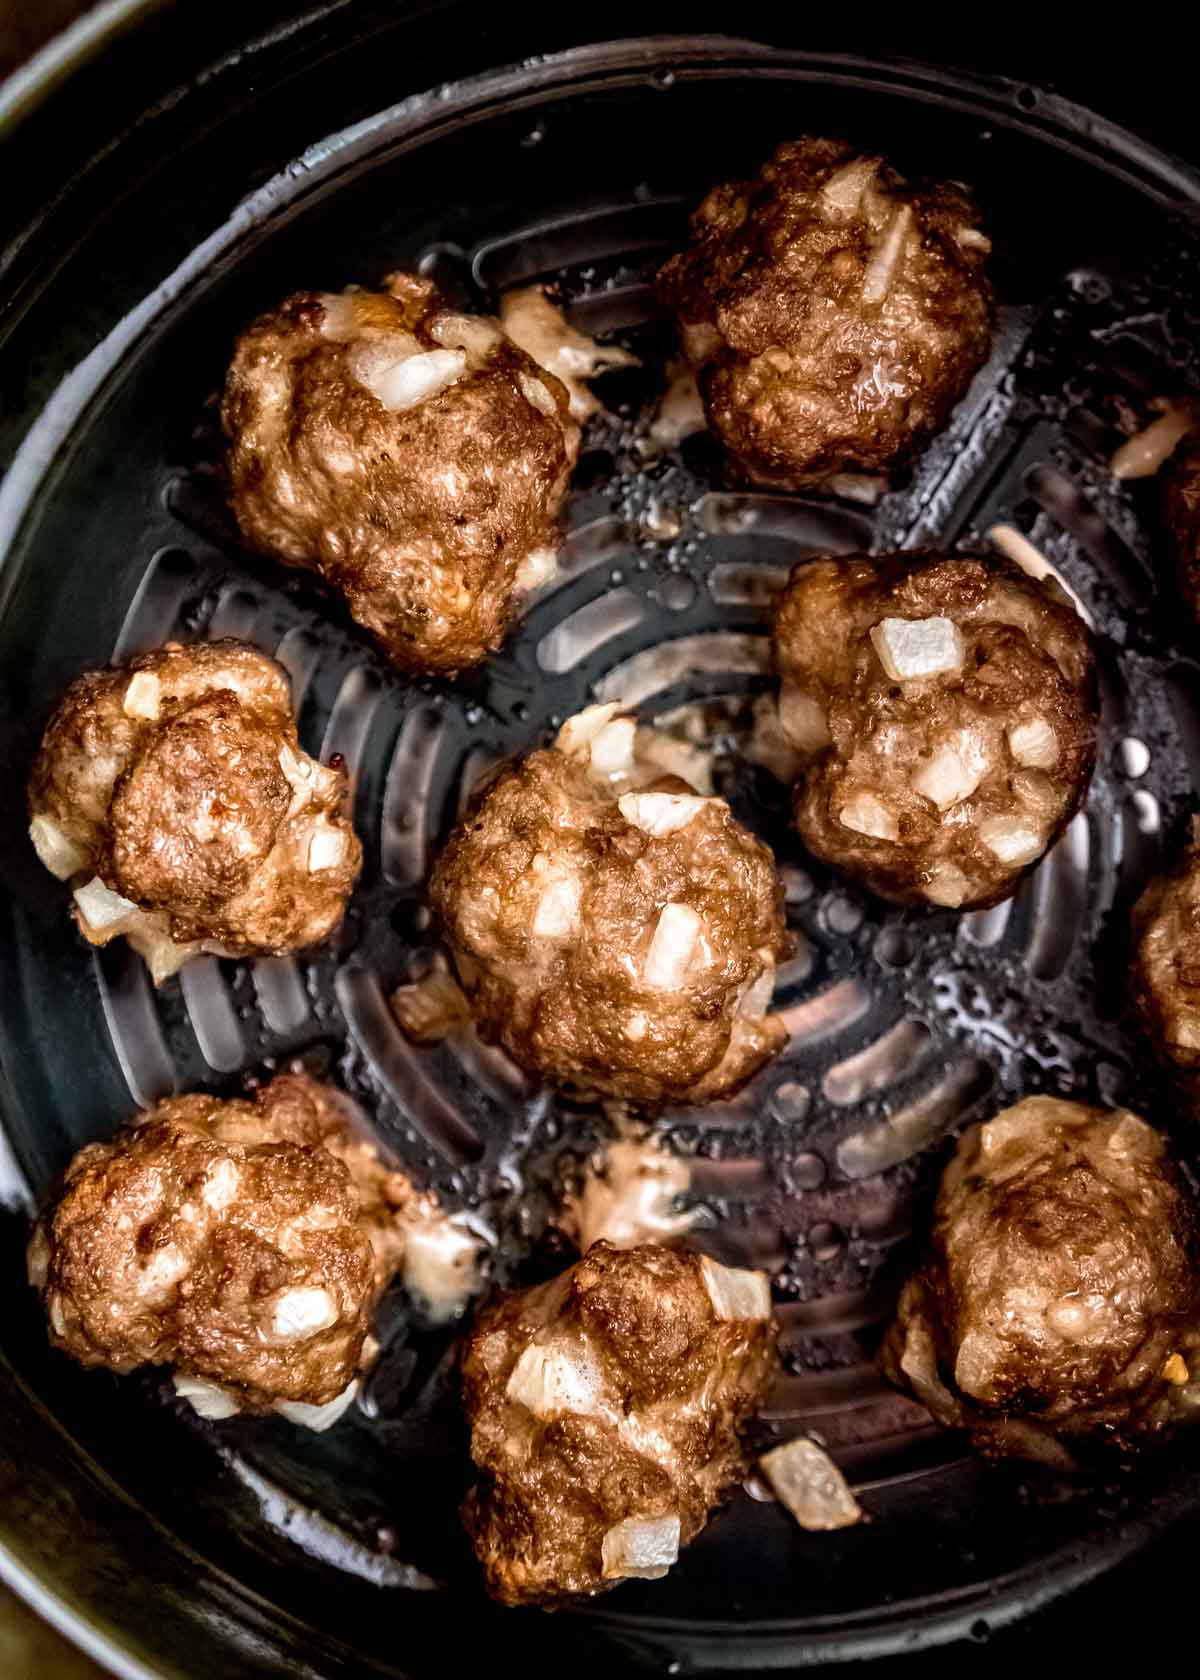 cook meatballs in the air fryer 10-12 minutes